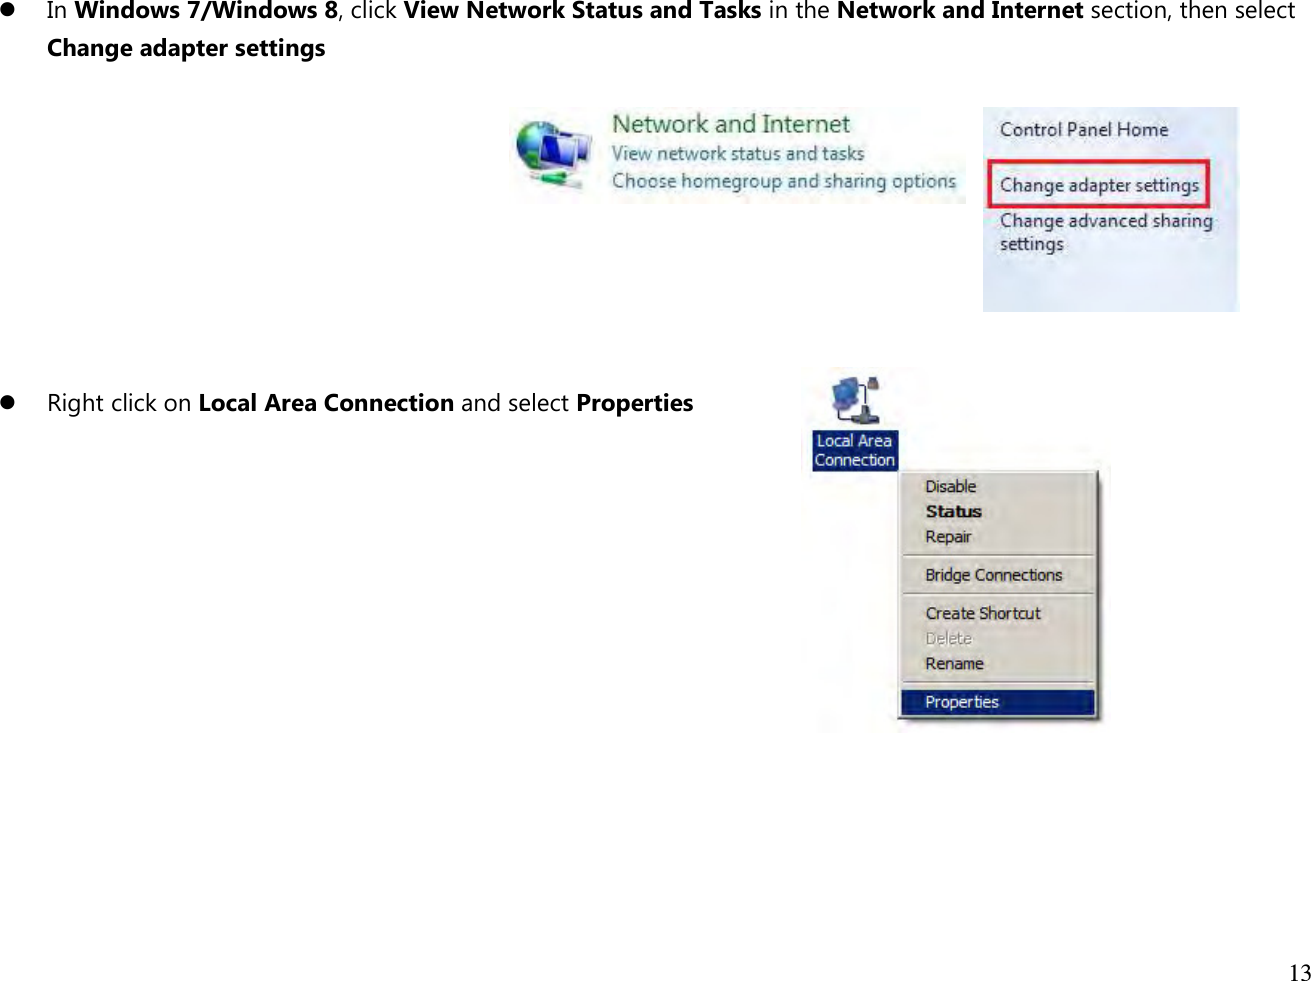  13   In Windows 7/Windows 8, click View Network Status and Tasks in the Network and Internet section, then select Change adapter settings           Right click on Local Area Connection and select Properties             